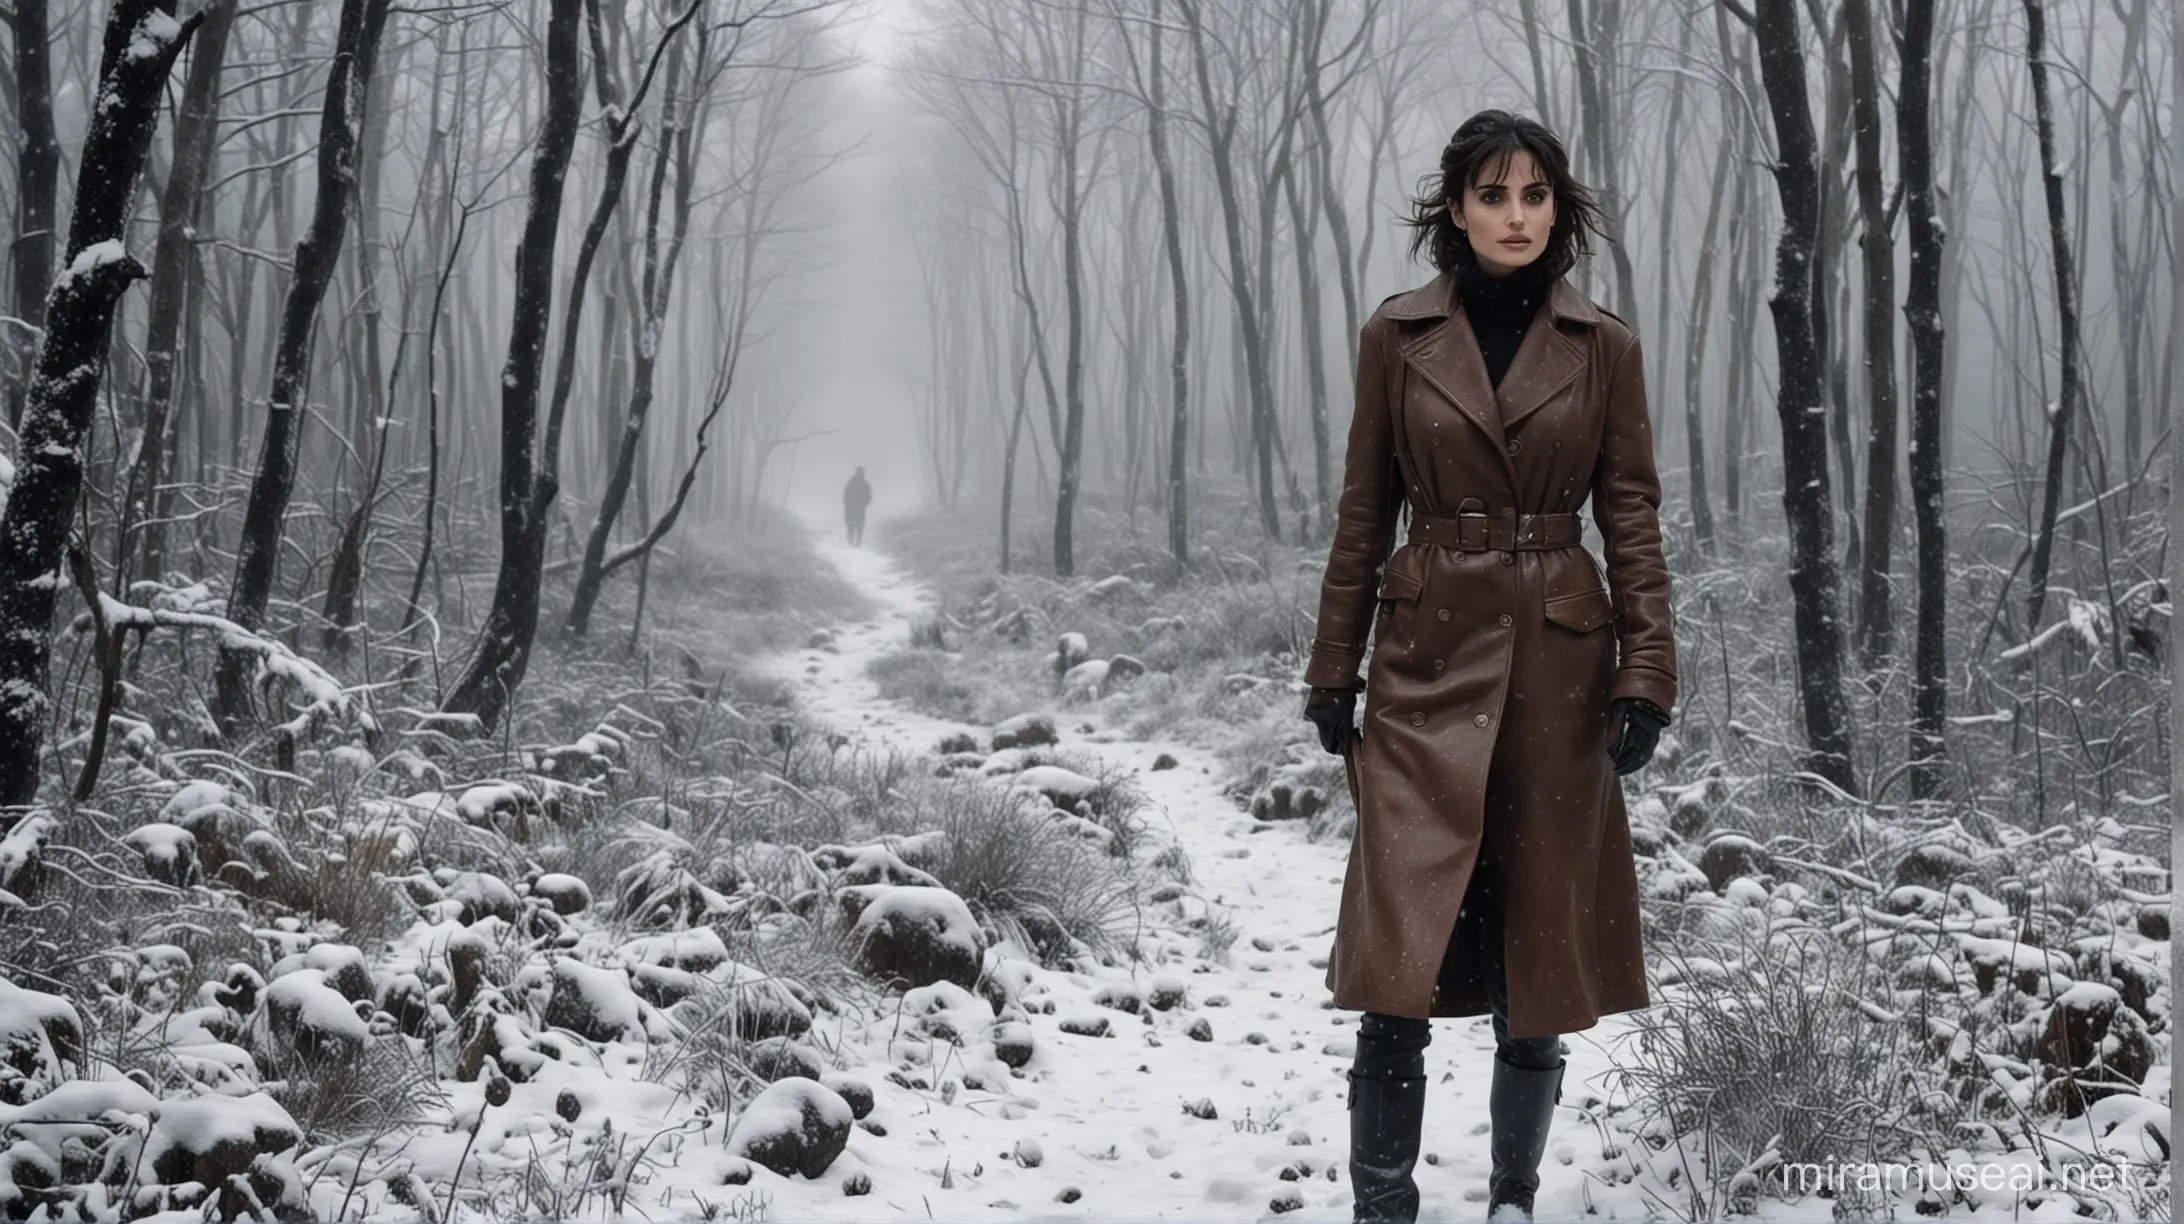 From a high angle, Penelope Cruz, in the style of a French graphic novel, walks in a dense arctic forest in a snowstorm, wearing big leather boots and a woollen coat, holding an antique camera